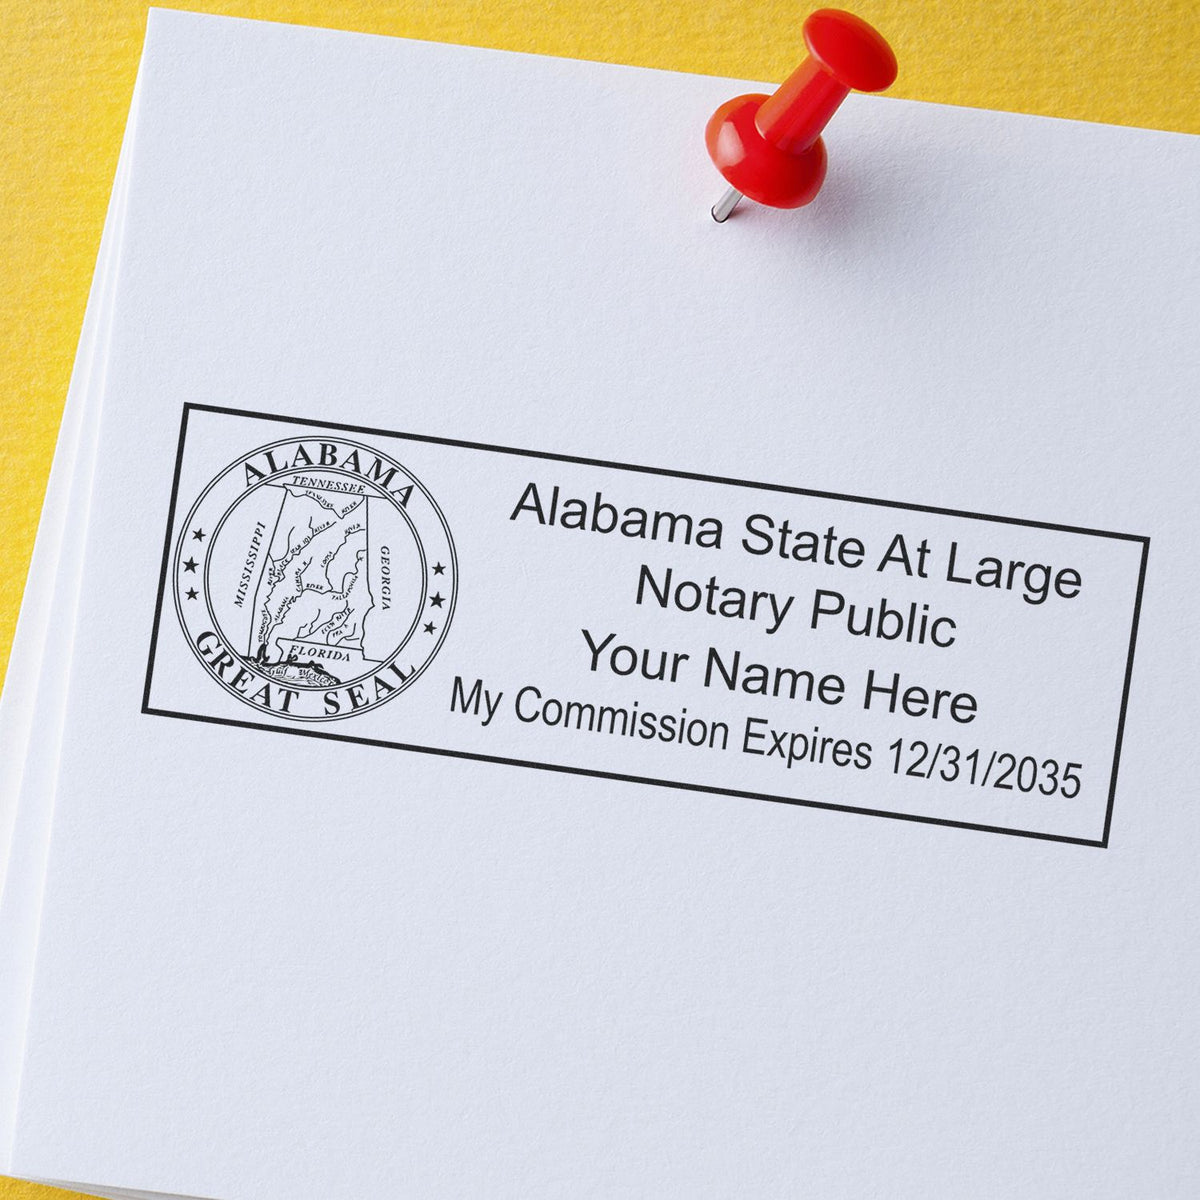 An alternative view of the PSI Alabama Notary Stamp stamped on a sheet of paper showing the image in use